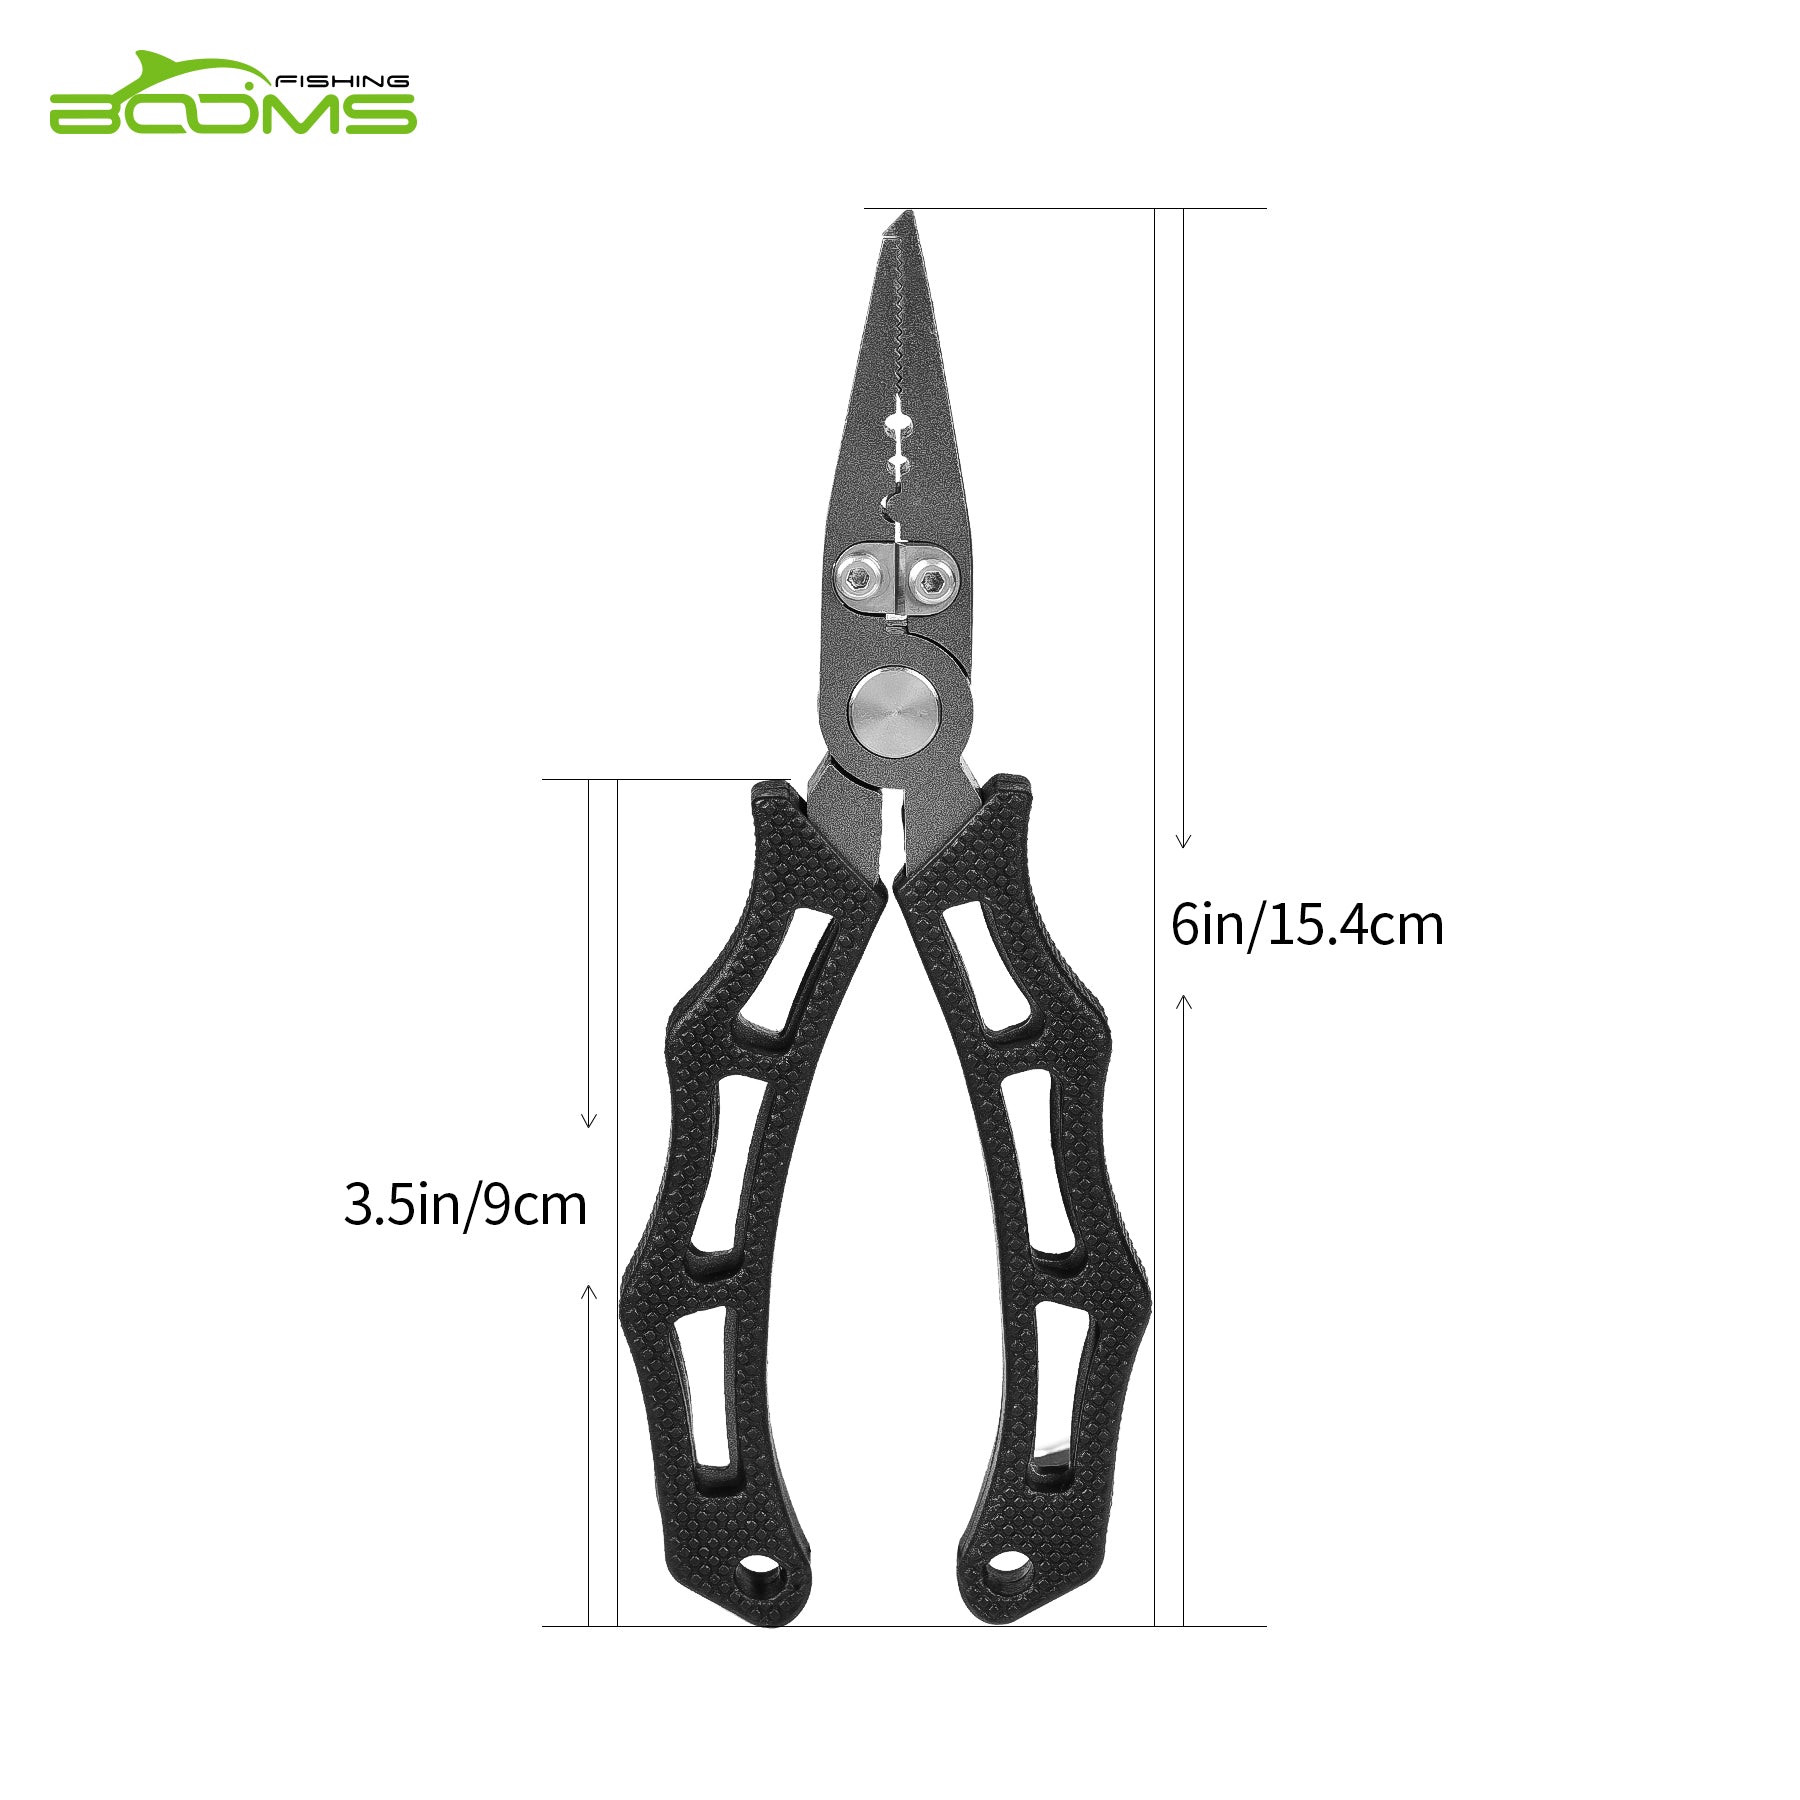 F07 Fishing Pliers Stainless Steel Construction Small Size